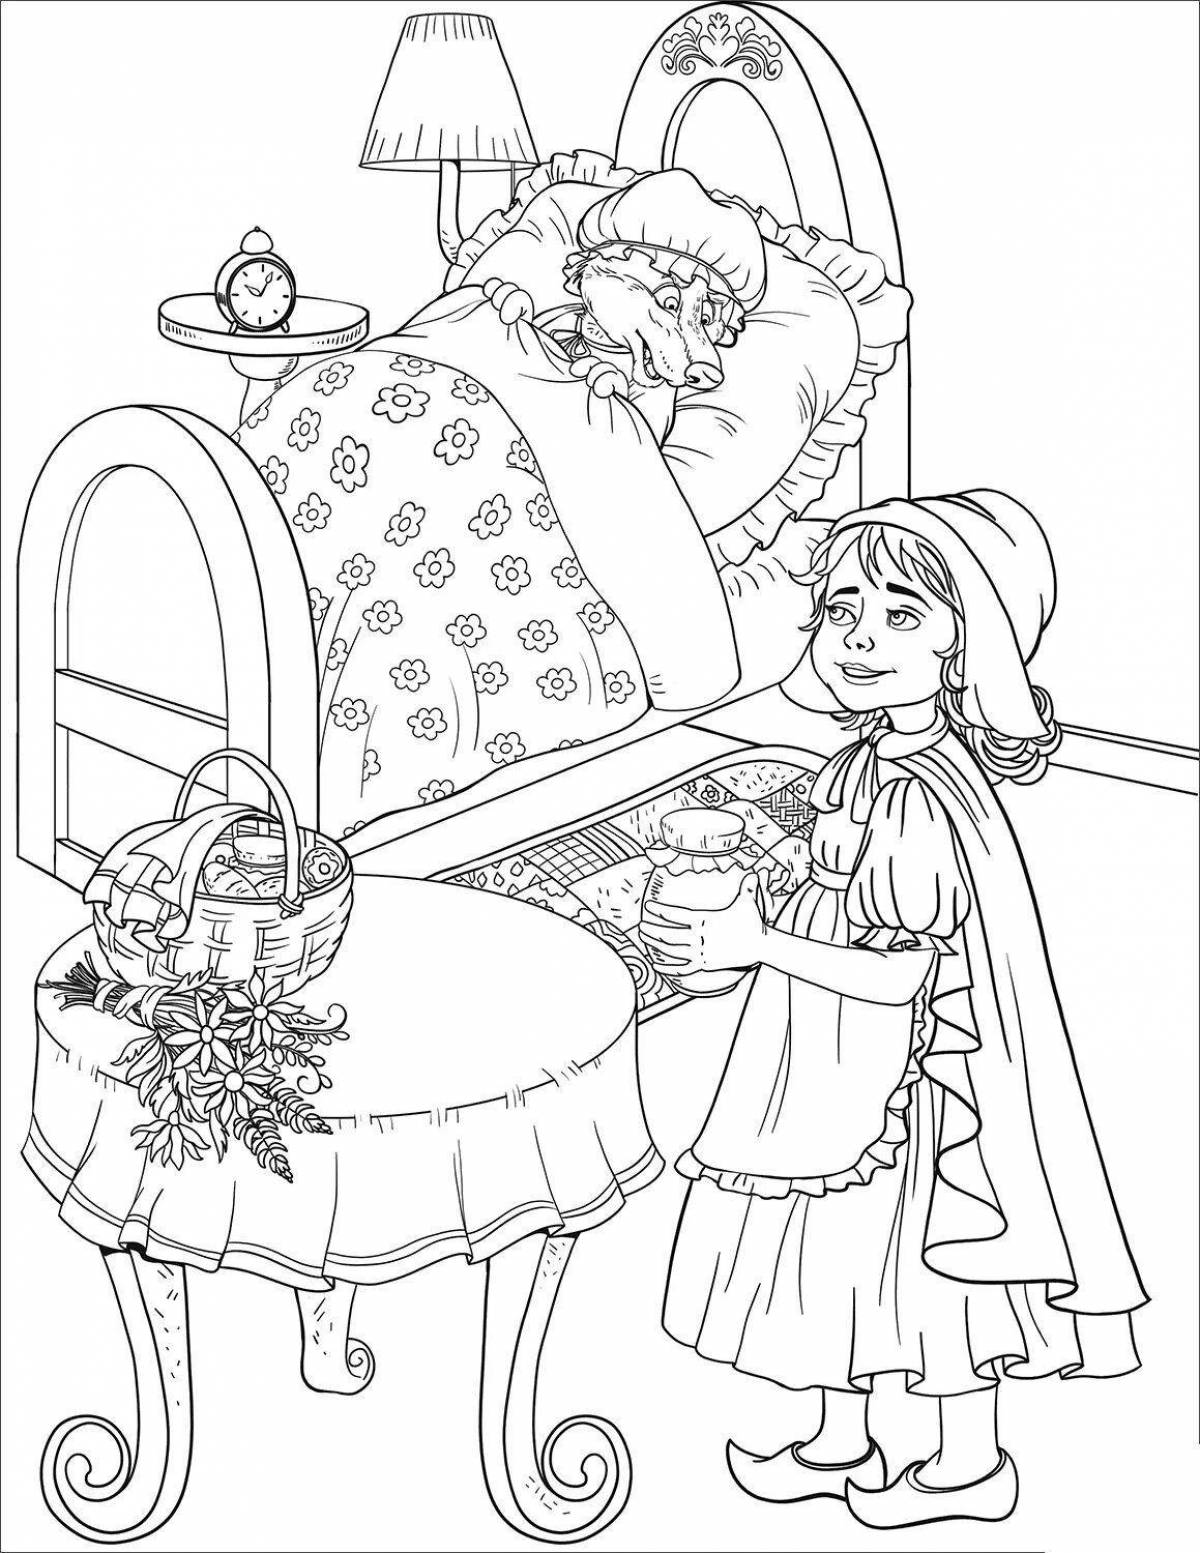 Coloring book funny gray wolf and Little Red Riding Hood